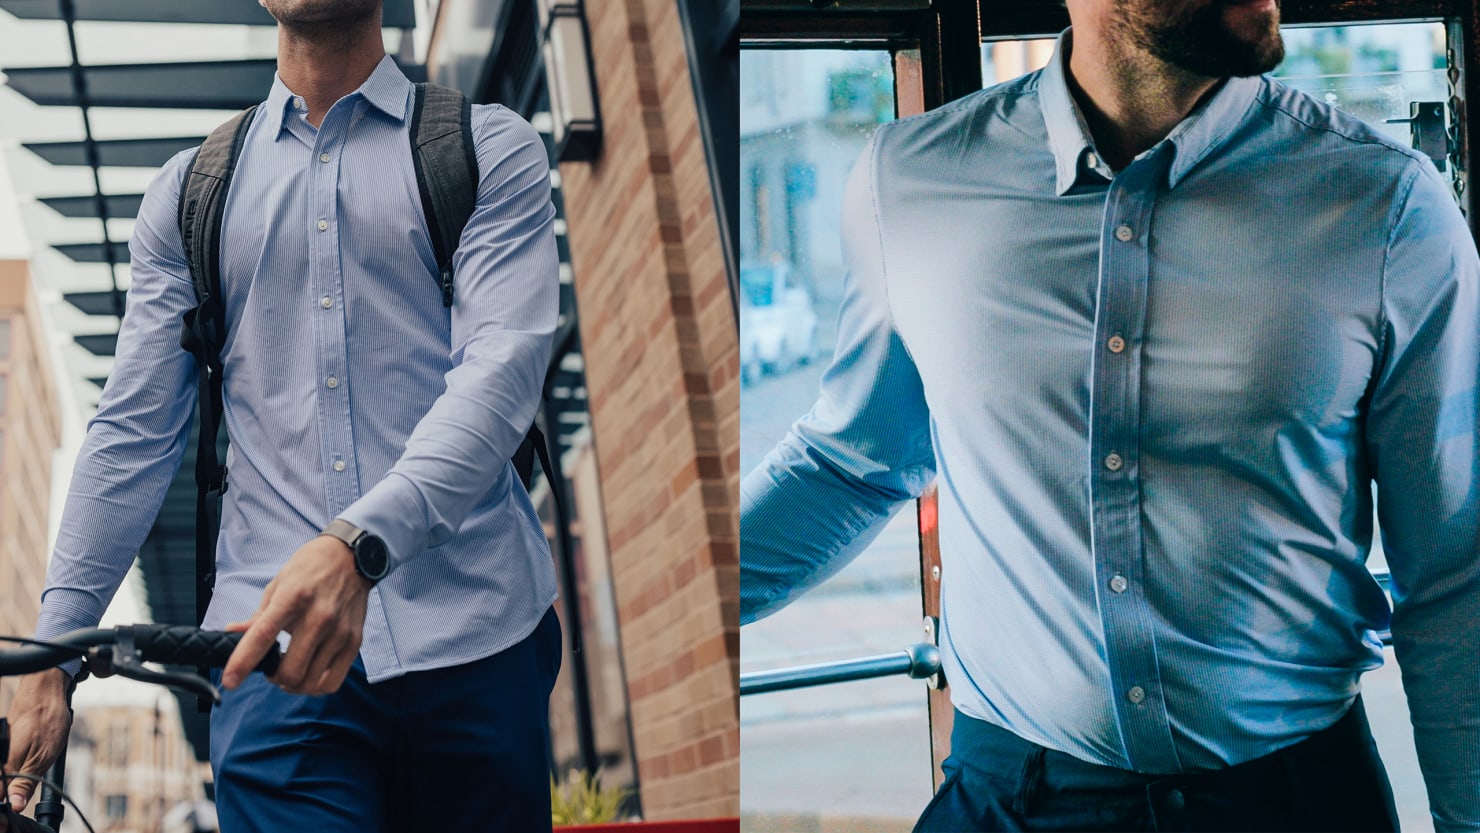 Rhones New Commuter Dress Shirt combines premium style with enhanced function